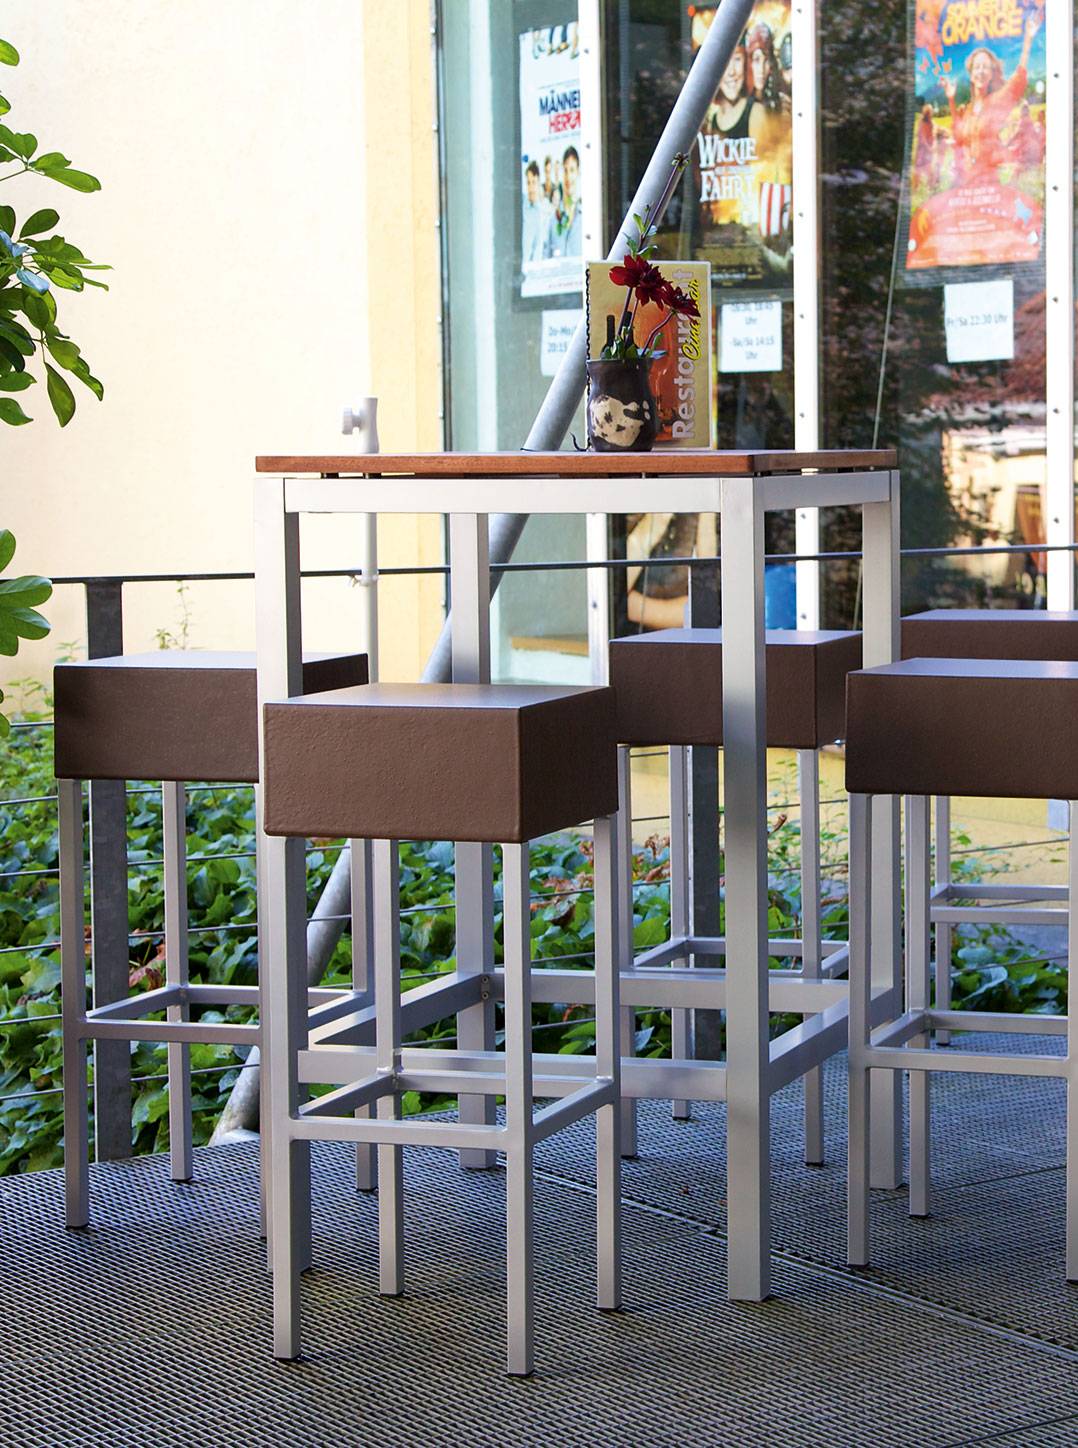 Outdoor high tables for your restaurant or hotel